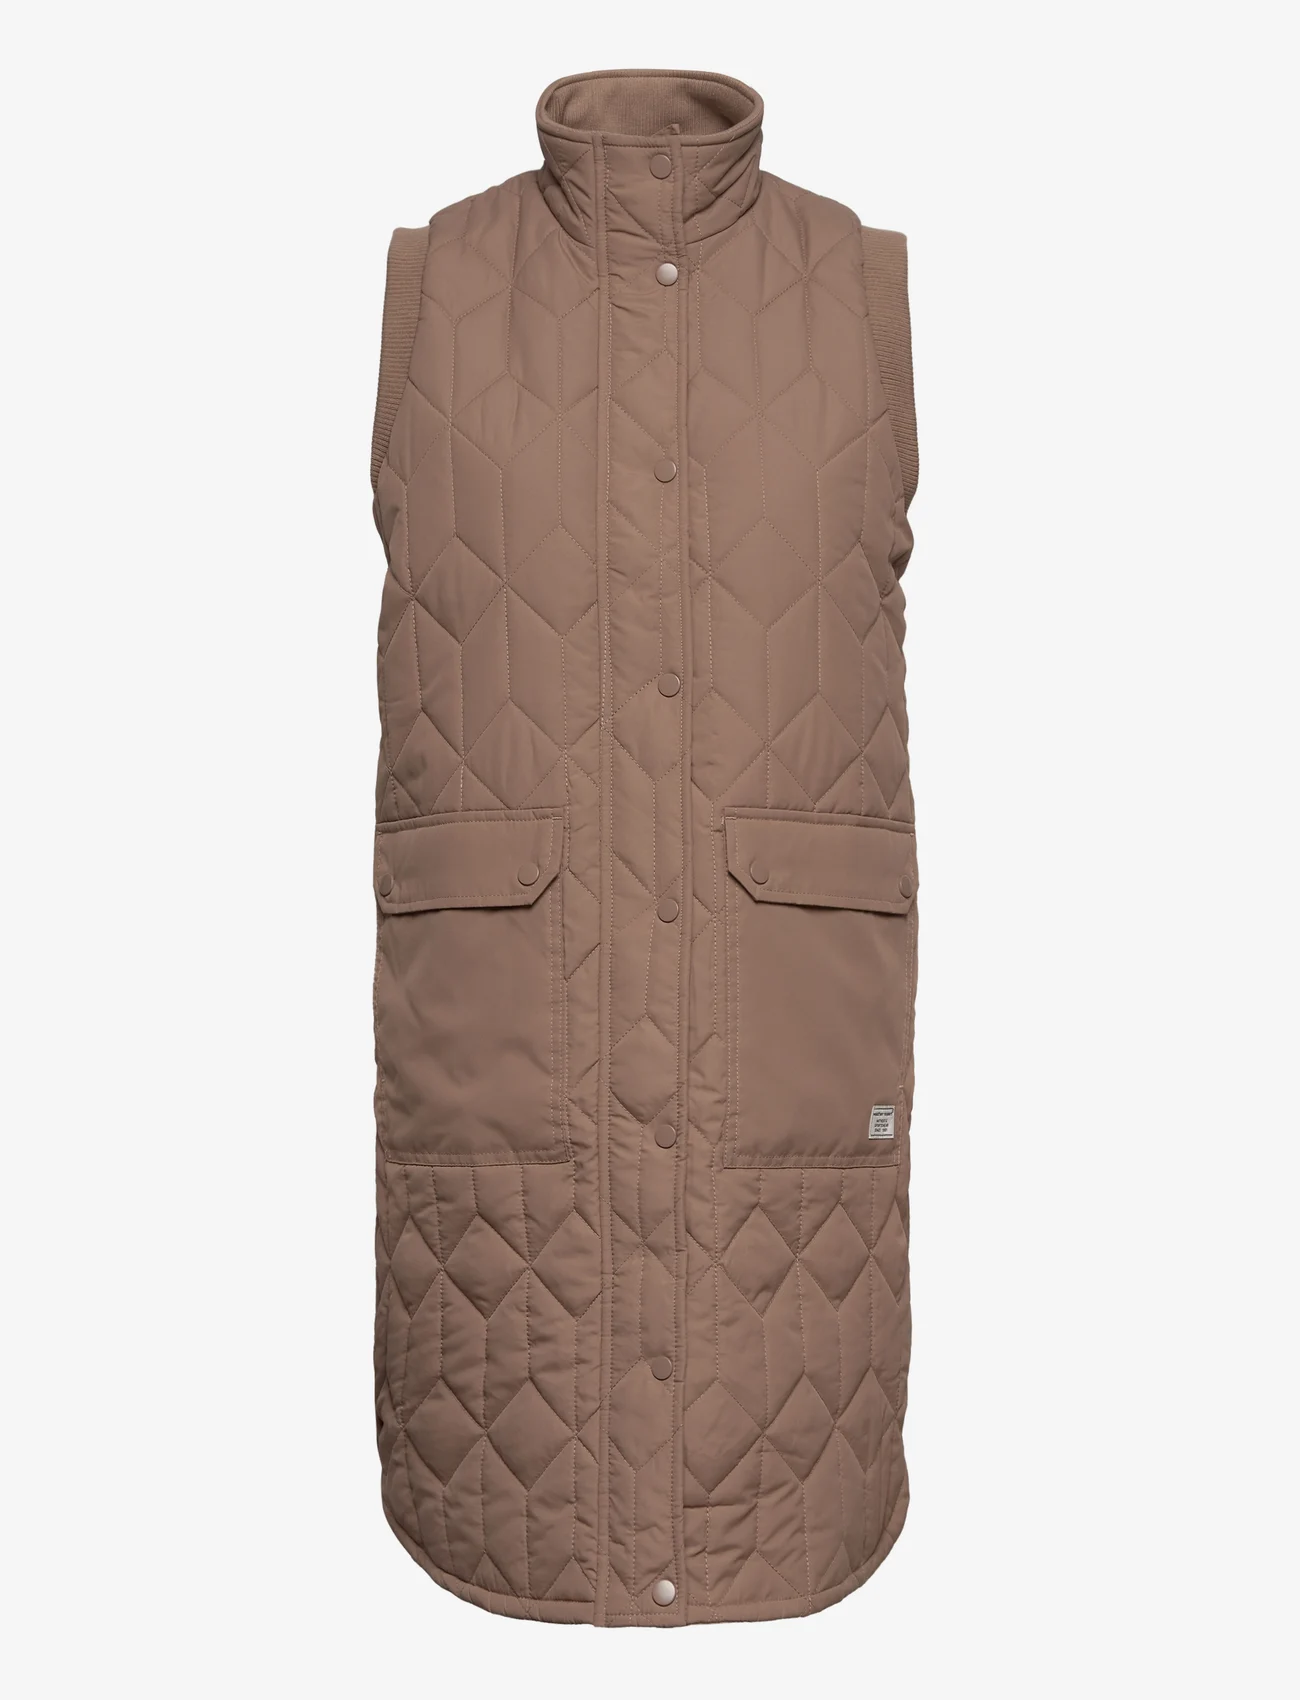 Weather Report - Beah W Long Quilted Vest - quiltade västar - pine bark - 0